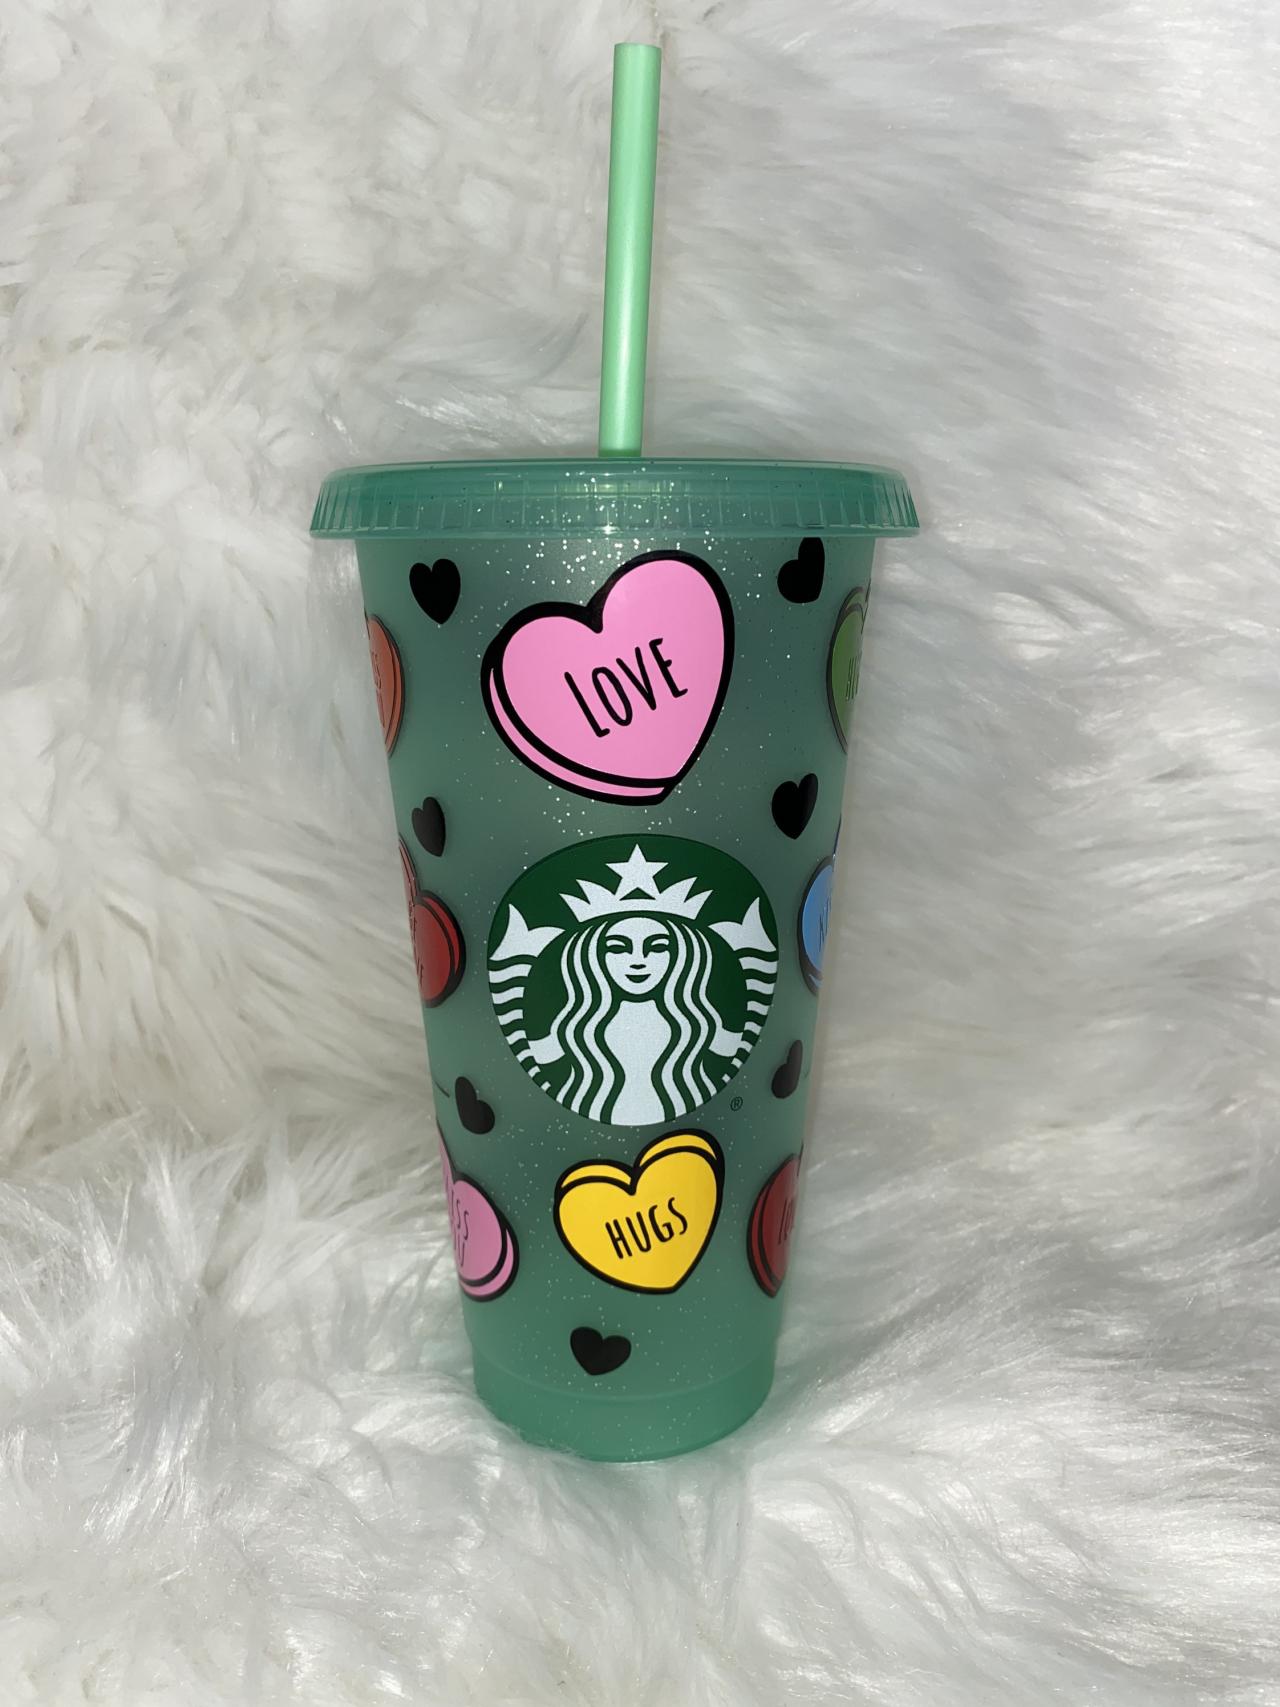 Starbucks Candy Hearts Cup, Starbucks Valentines Day Cup, Venti Starbucks Tumbler, Conversation Hearts